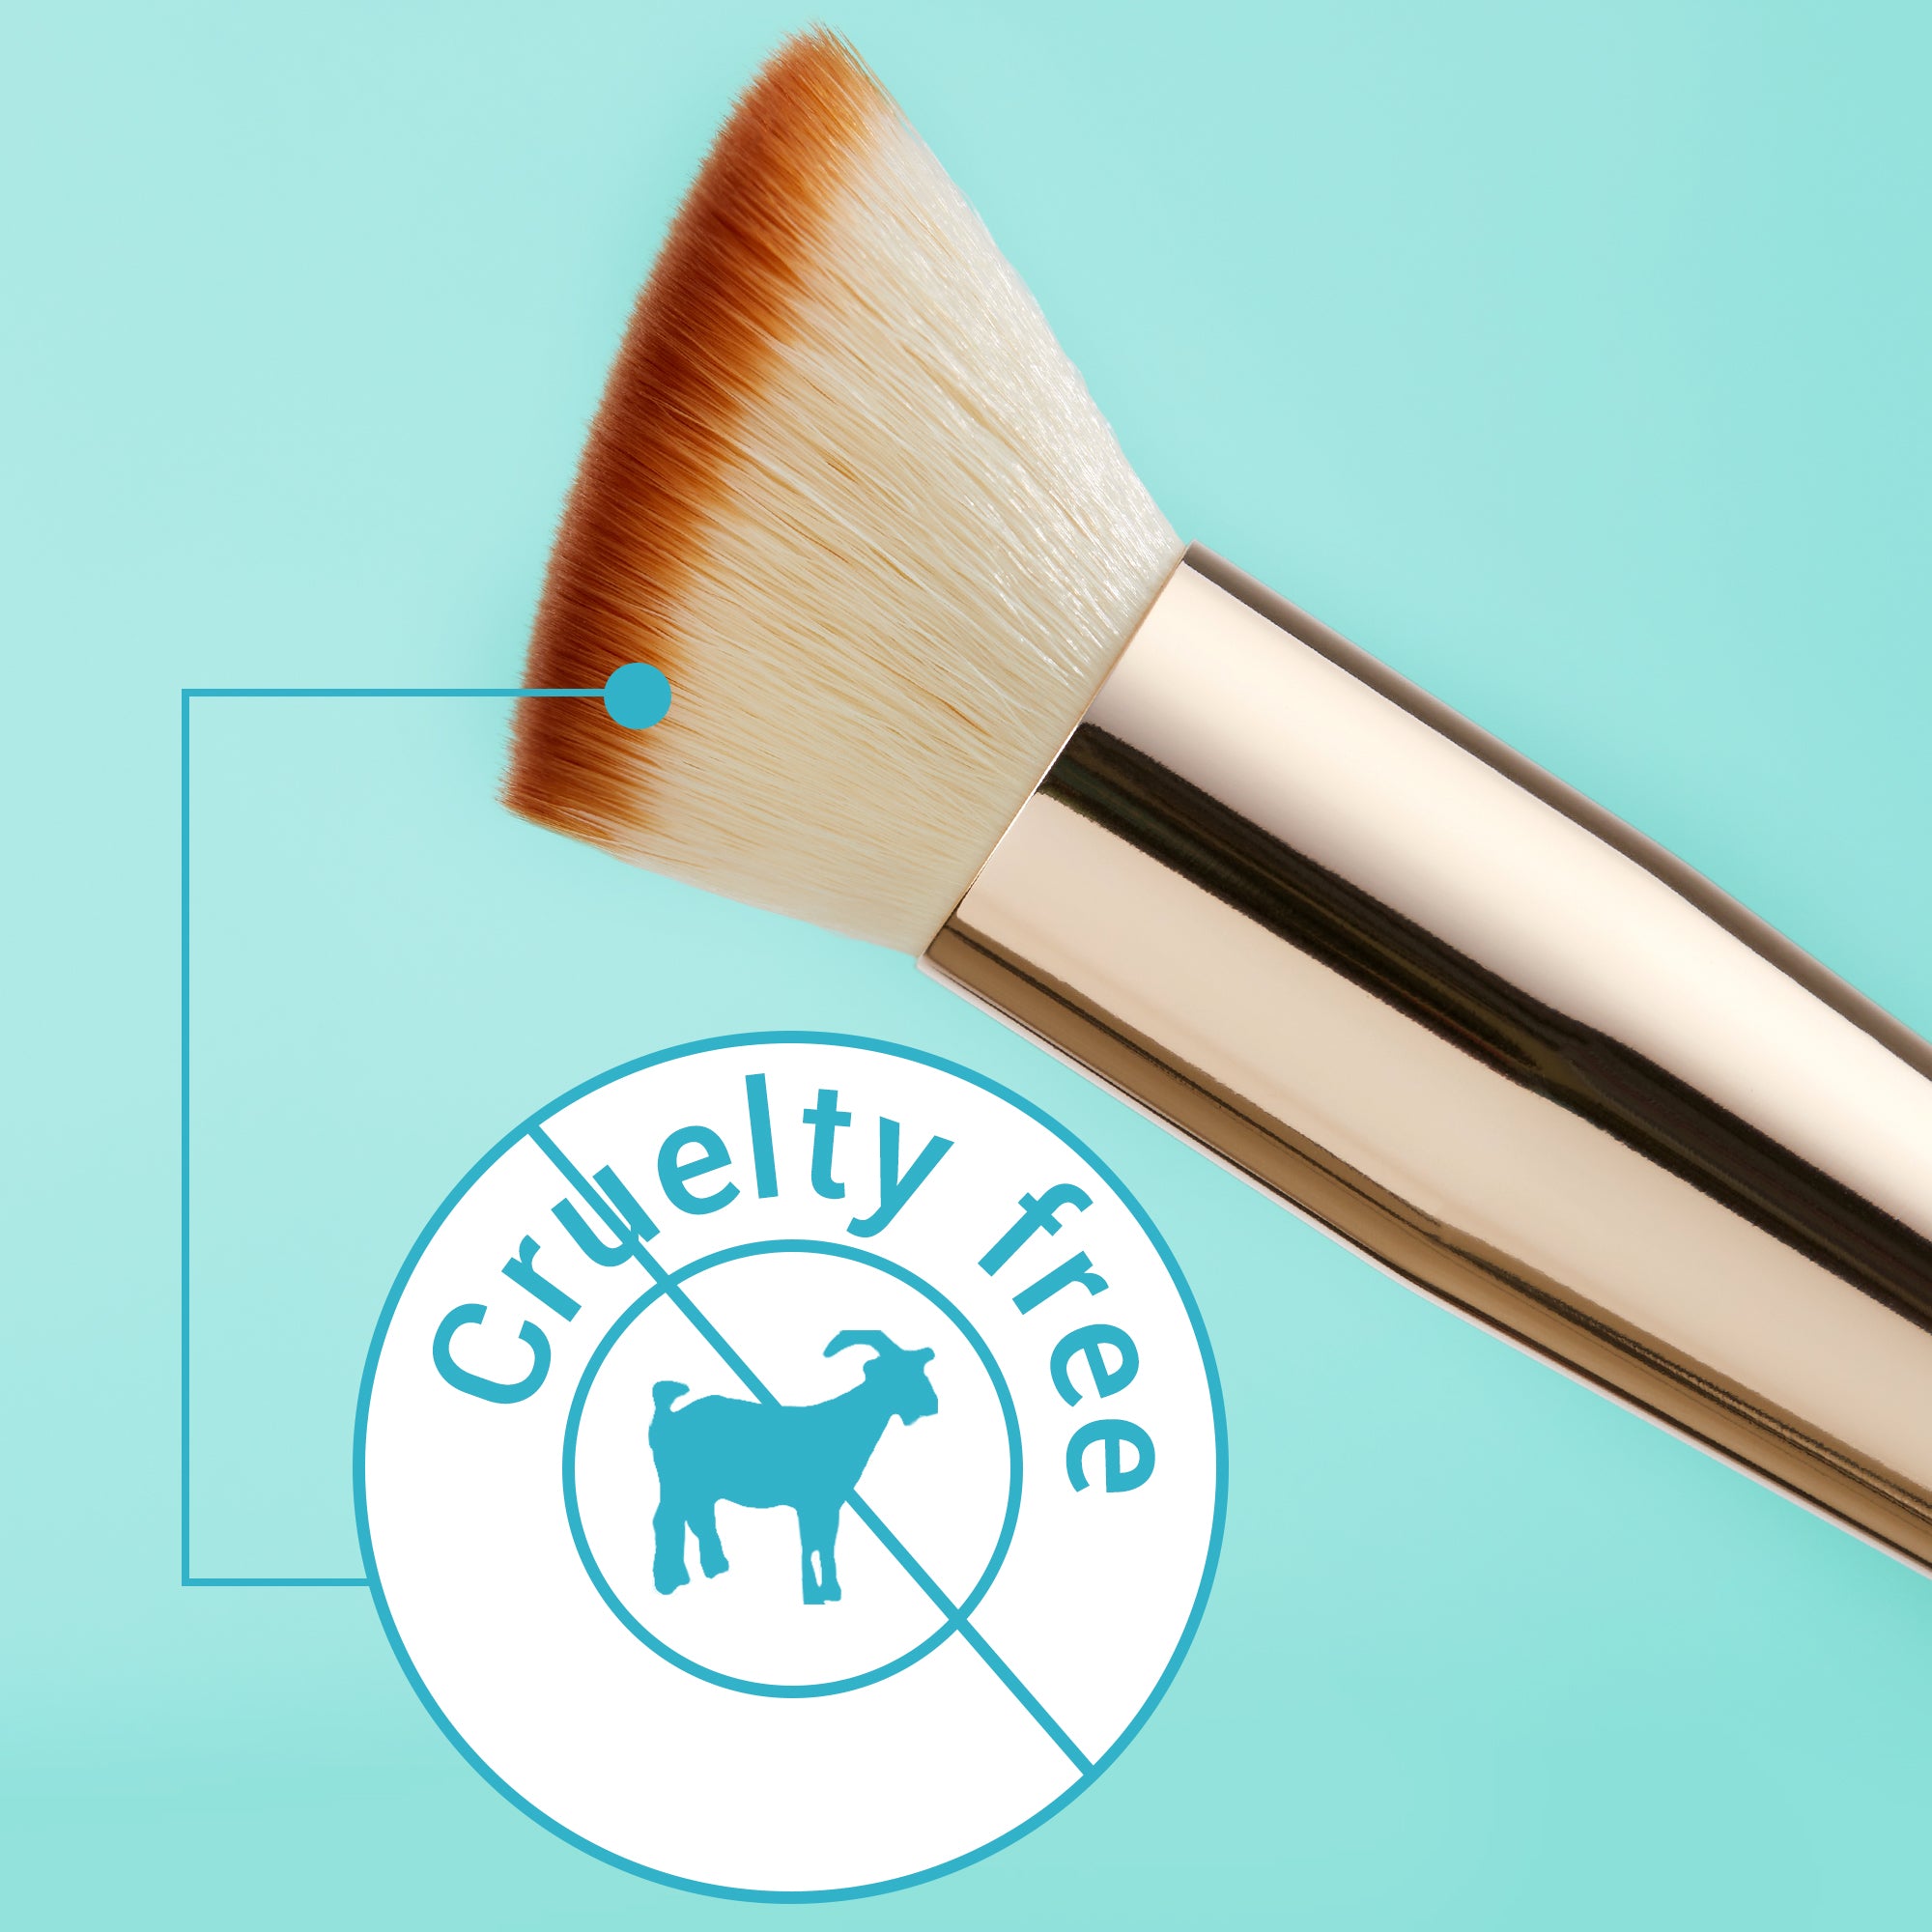 cruelty free makeup brushes - Jessup beauty